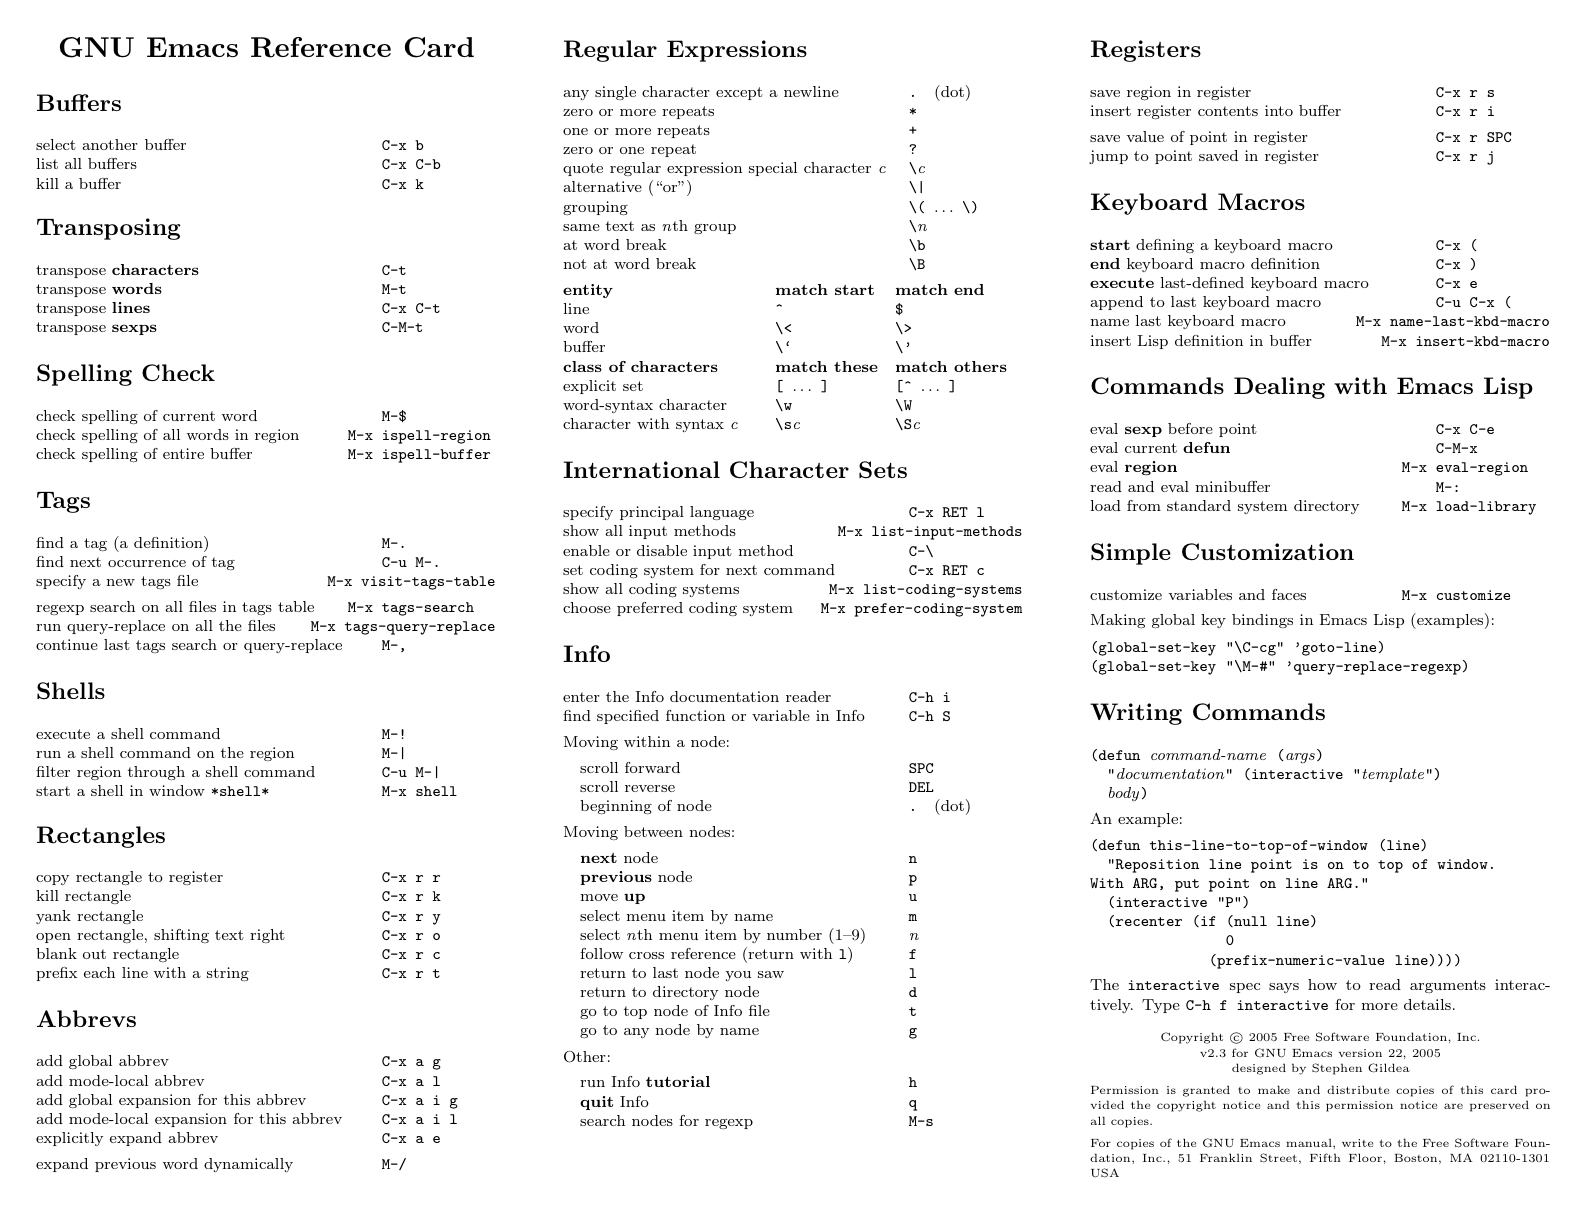 Emacs_22_Reference_Card_2.png